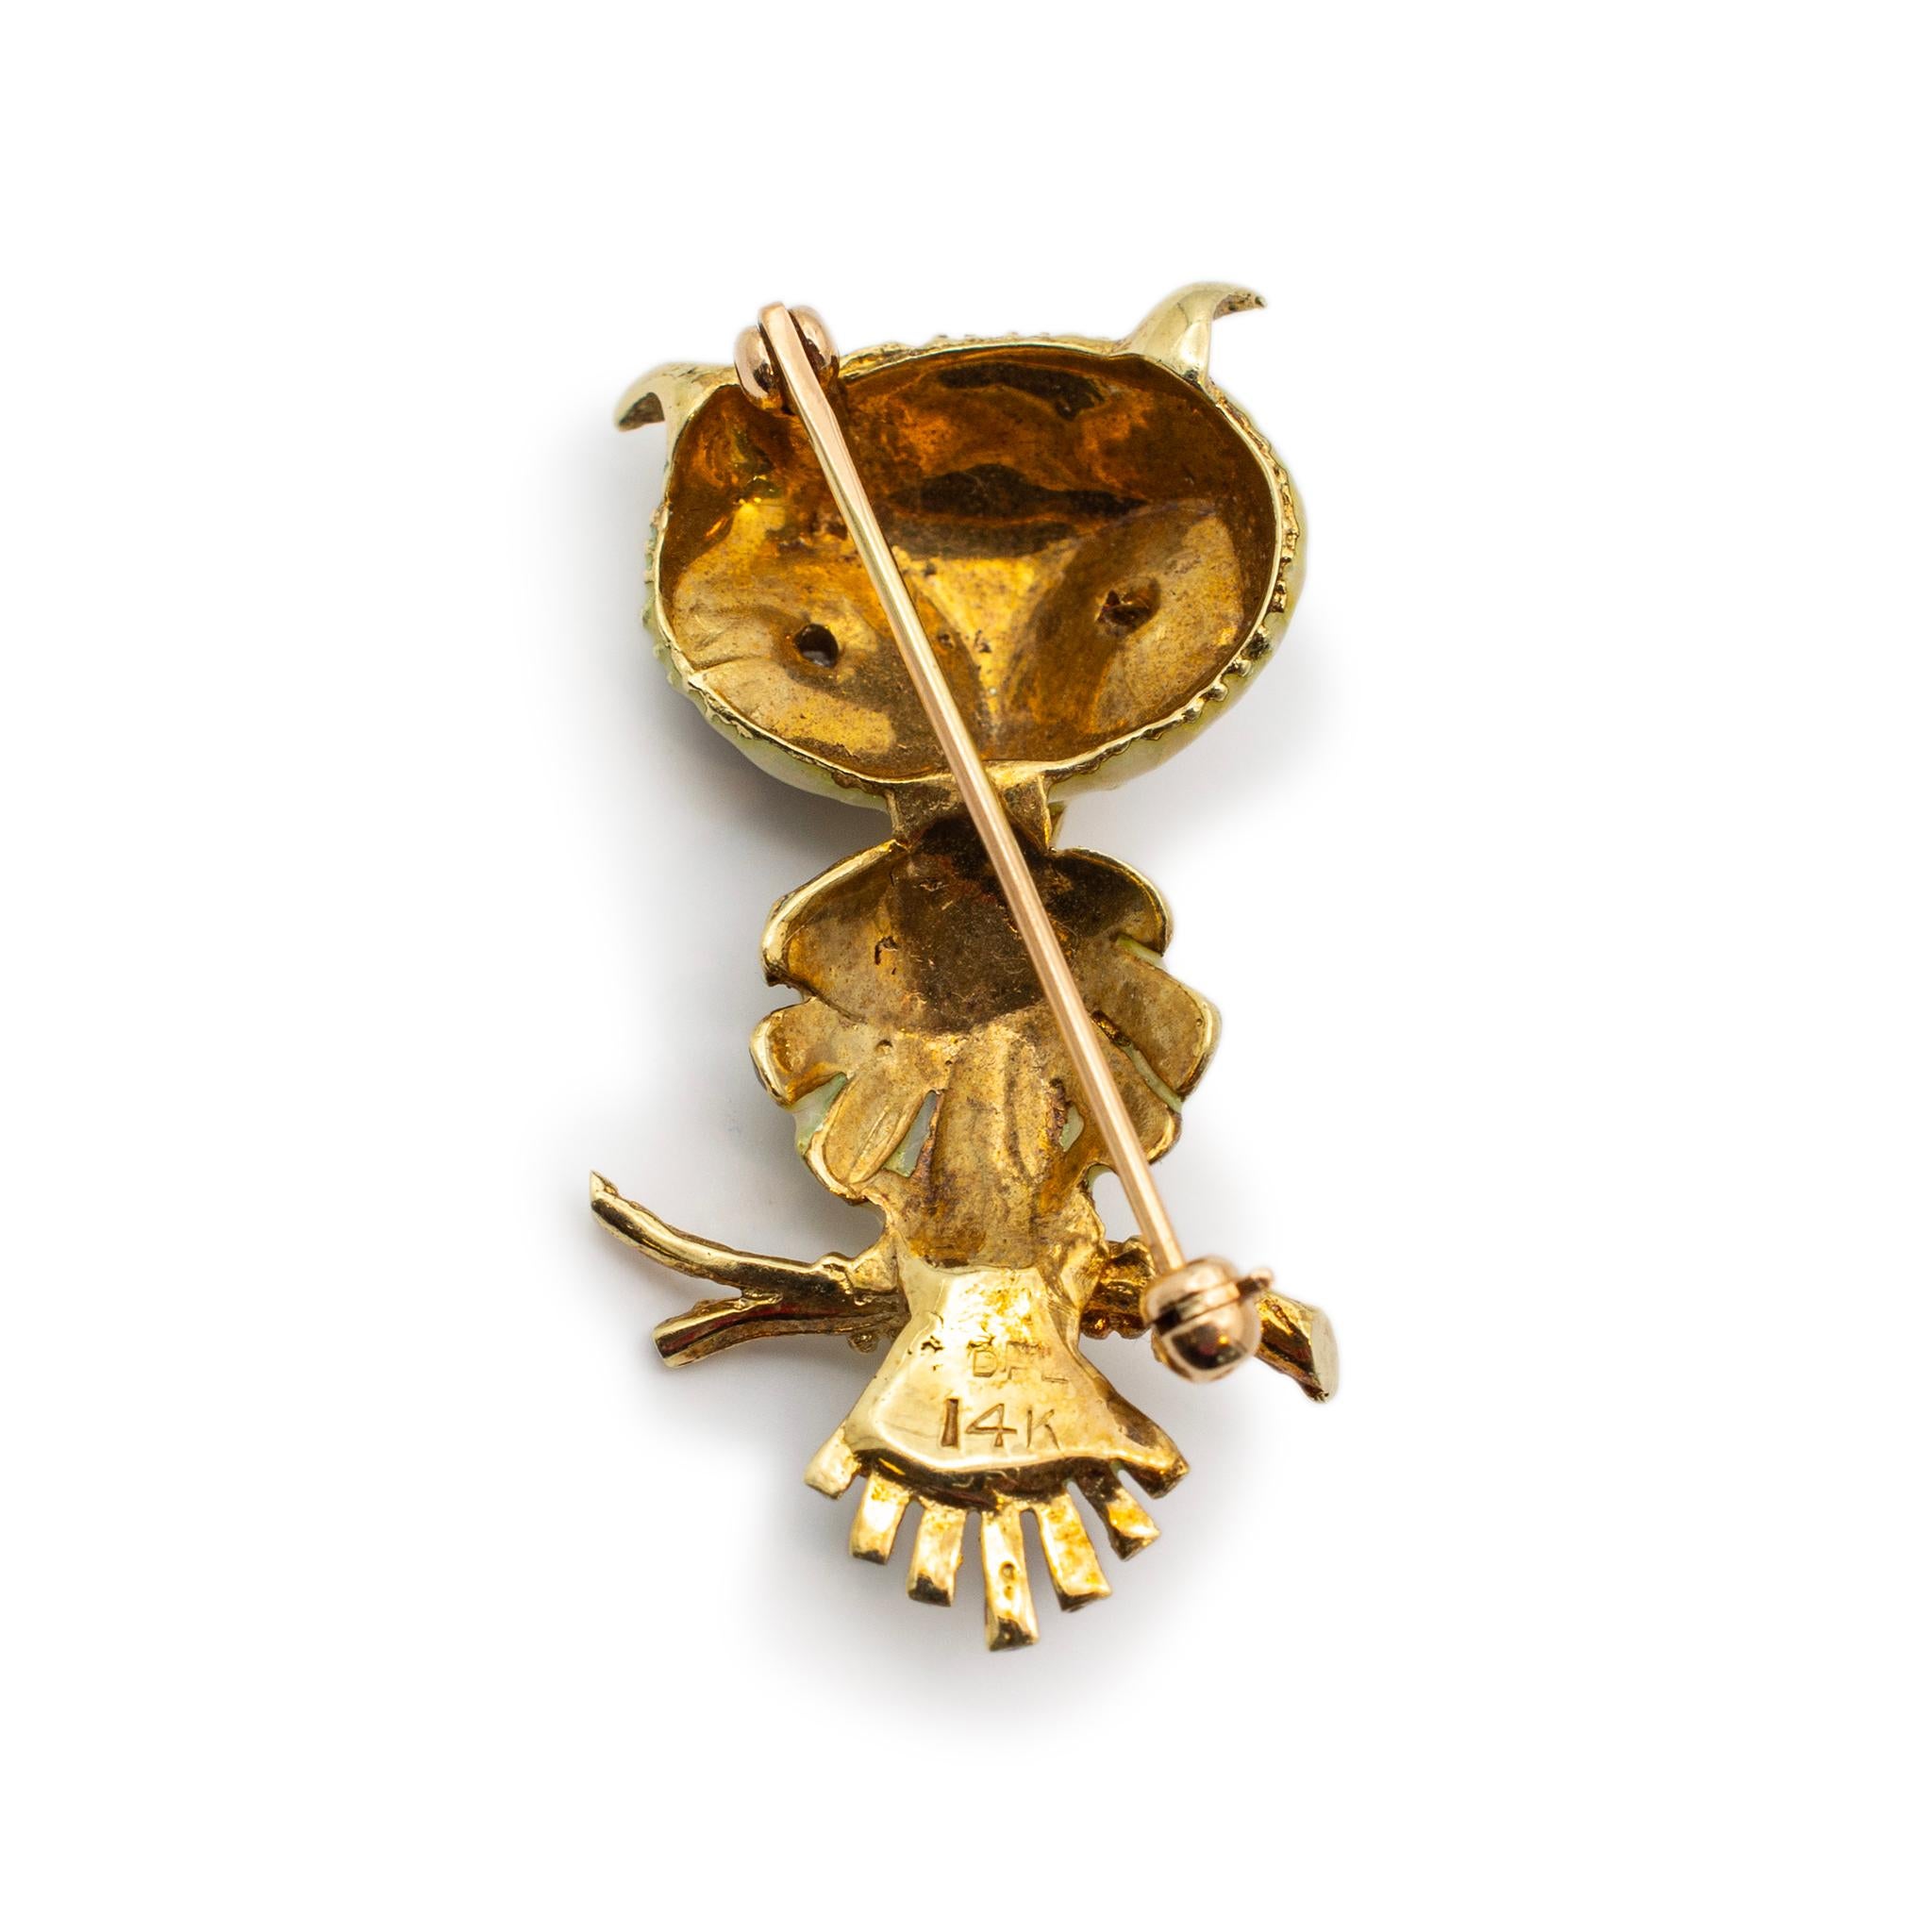 Metal Type: 14K Yellow Gold 

Length: 1.50 inches

Width: 18.60 mm

Weight: 7.48 grams

Ladies 14K yellow gold animal diamond mid-century brooch. Engraved with 